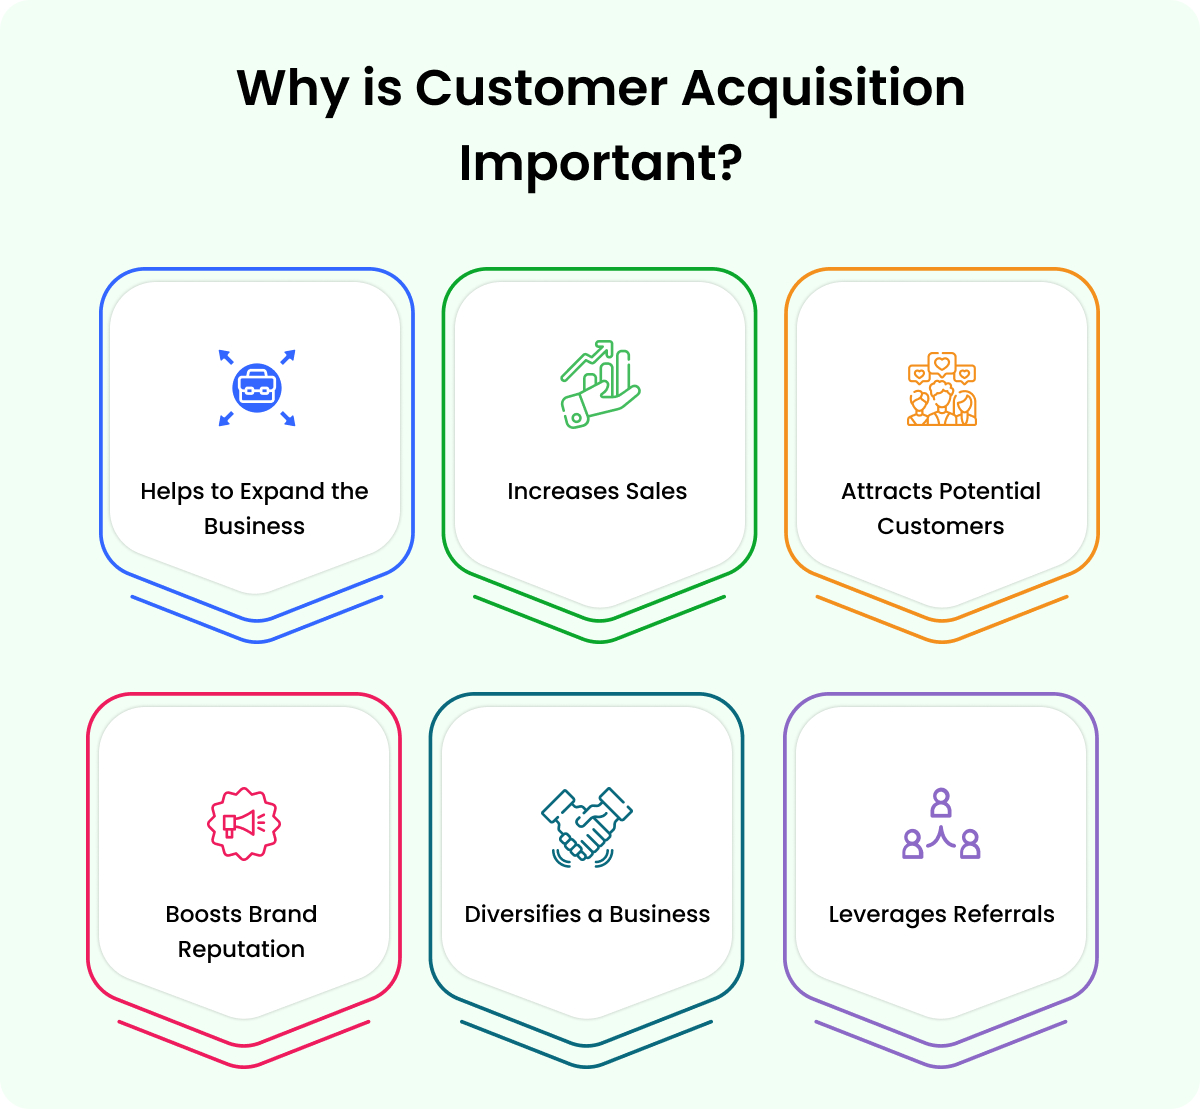 The importance of customer acquisition